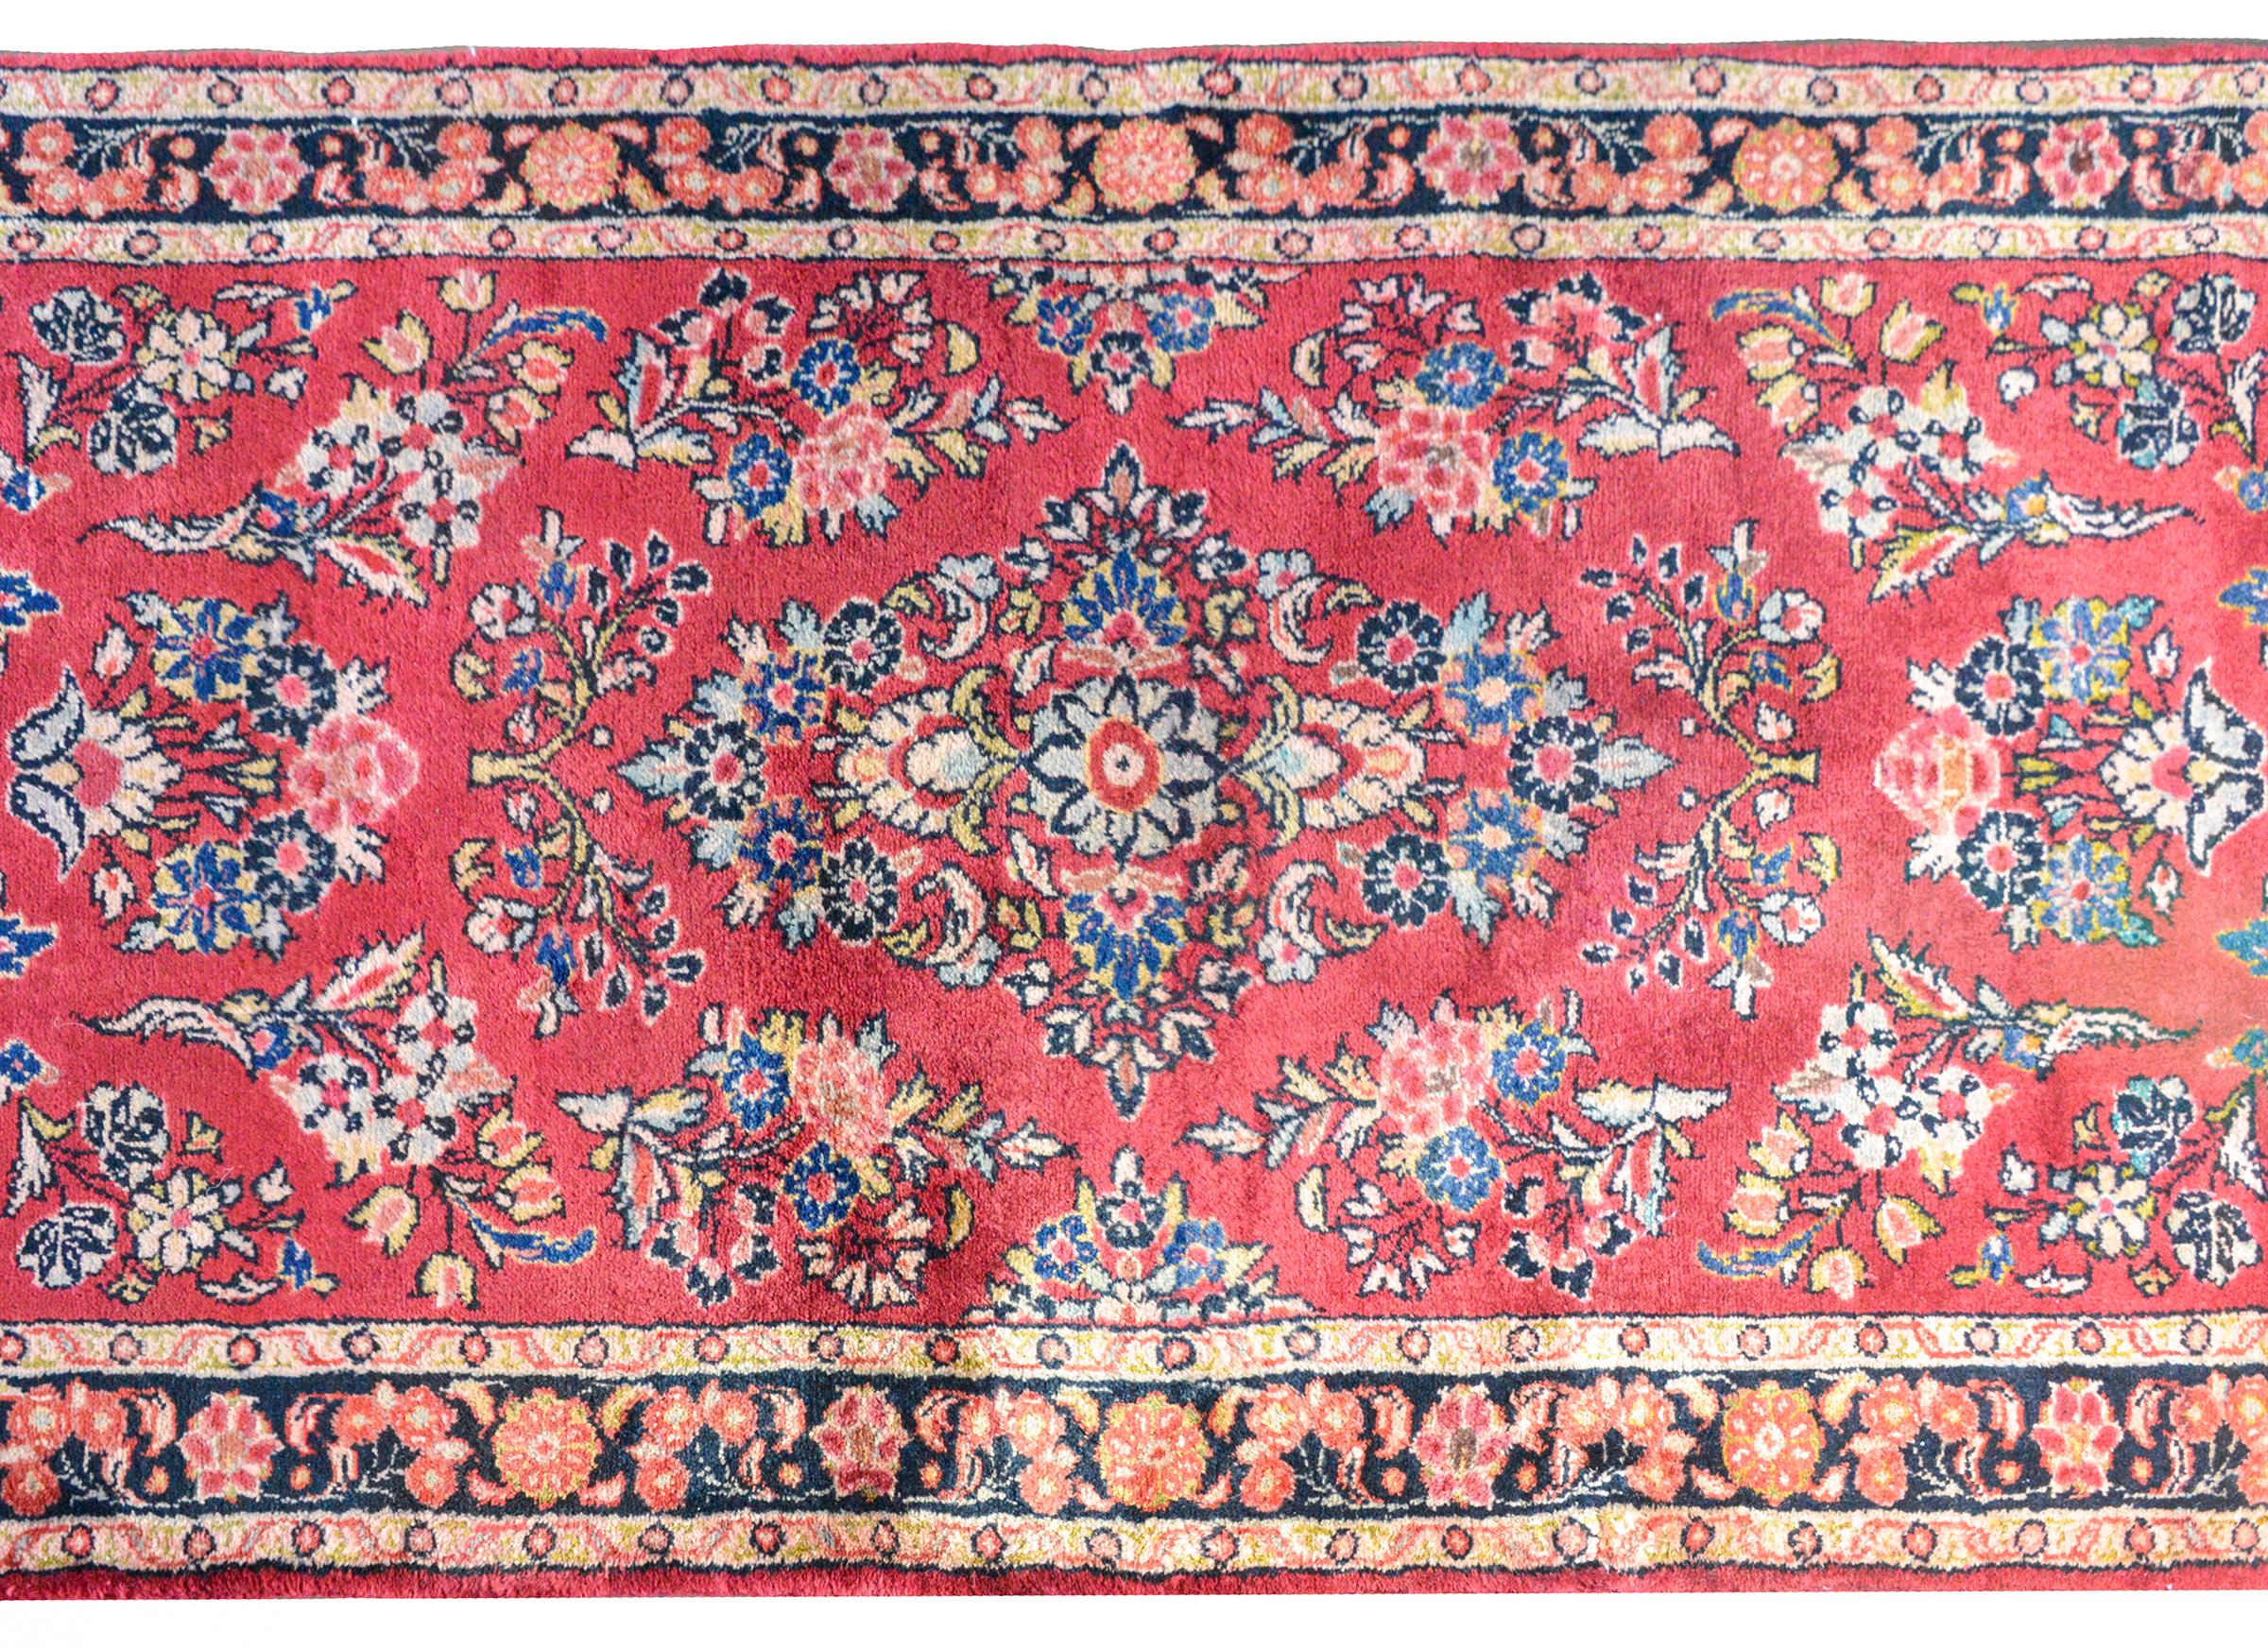 A wonderful early 20th century Persian Sarouk runner with a beautiful mirrored floral pattern woven in pink, gold, light and dark indigo, and white, against a bright red background. The border is simple with several petite floral patterned stripes.